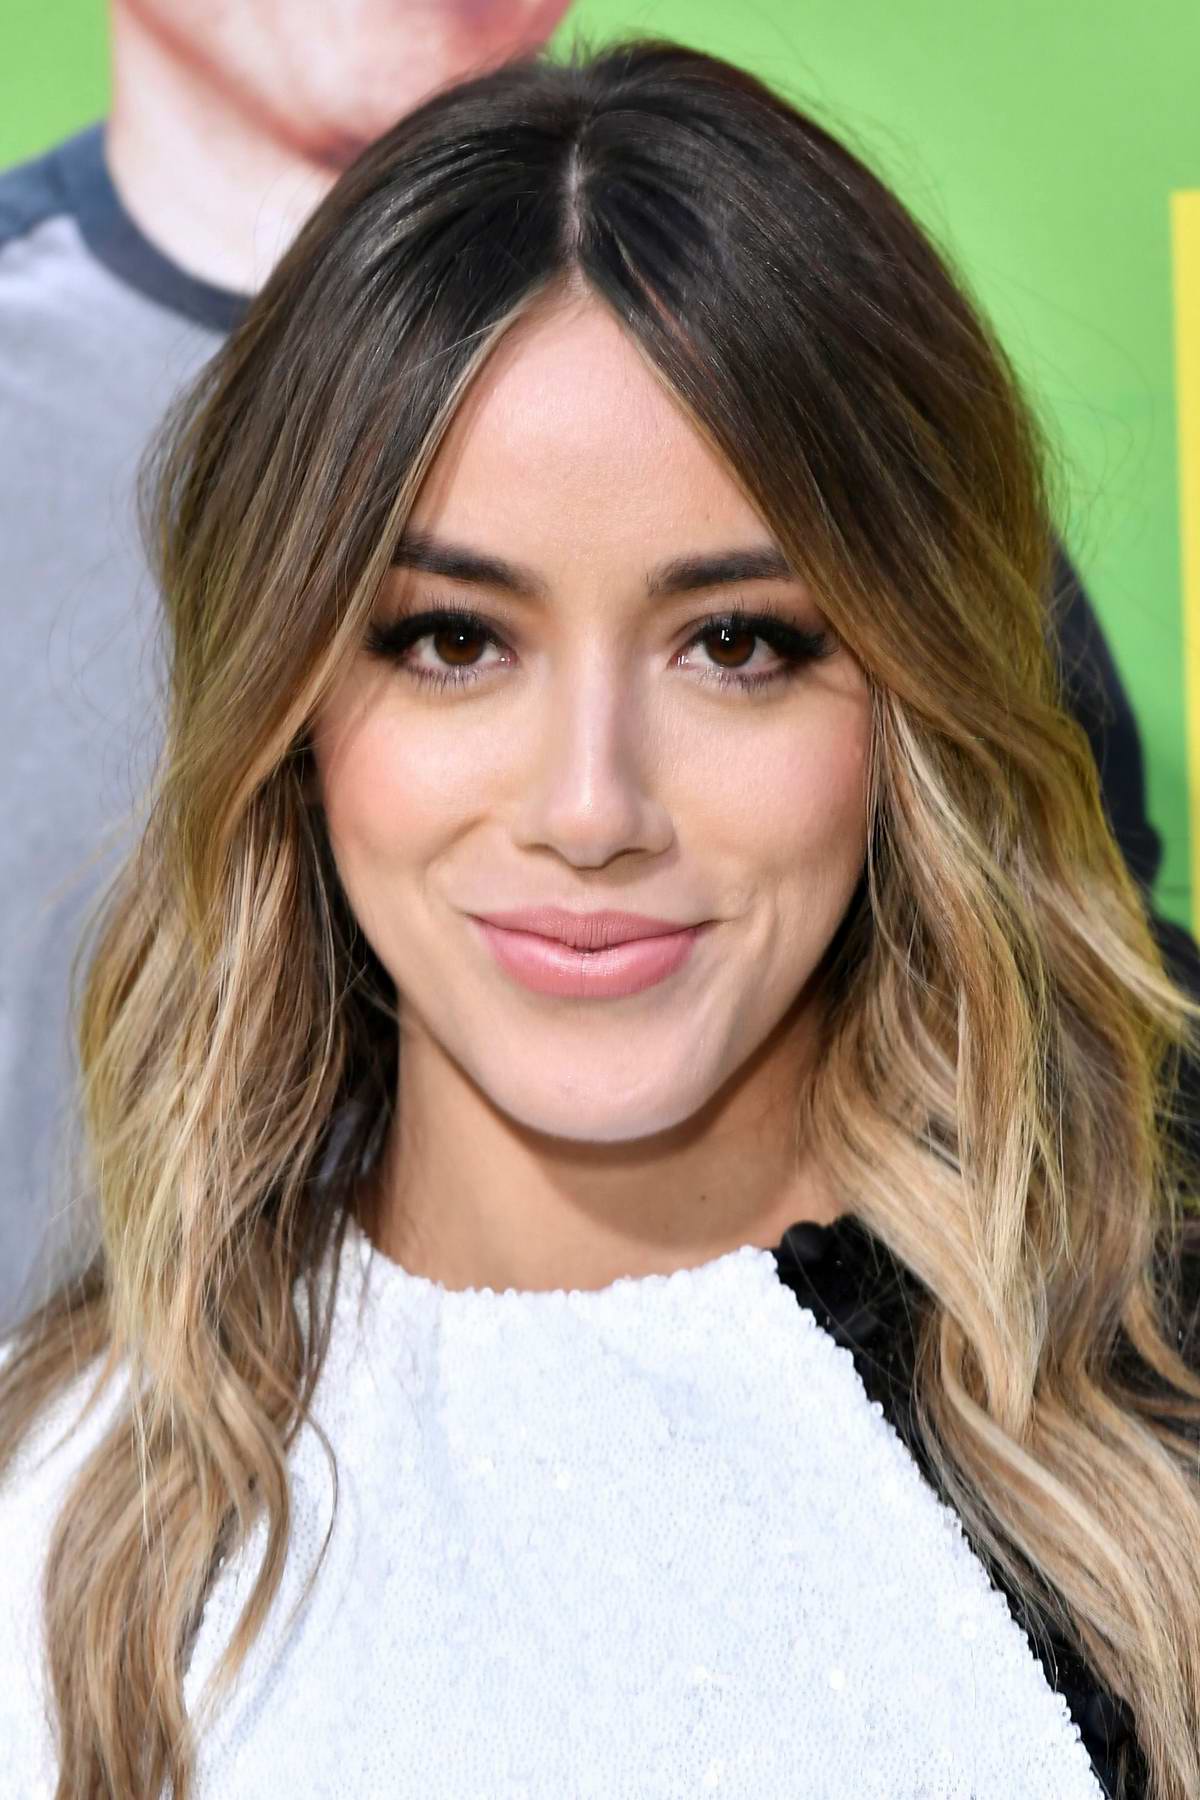 dacey anderson recommends chloe bennet wardrobe malfunction pic